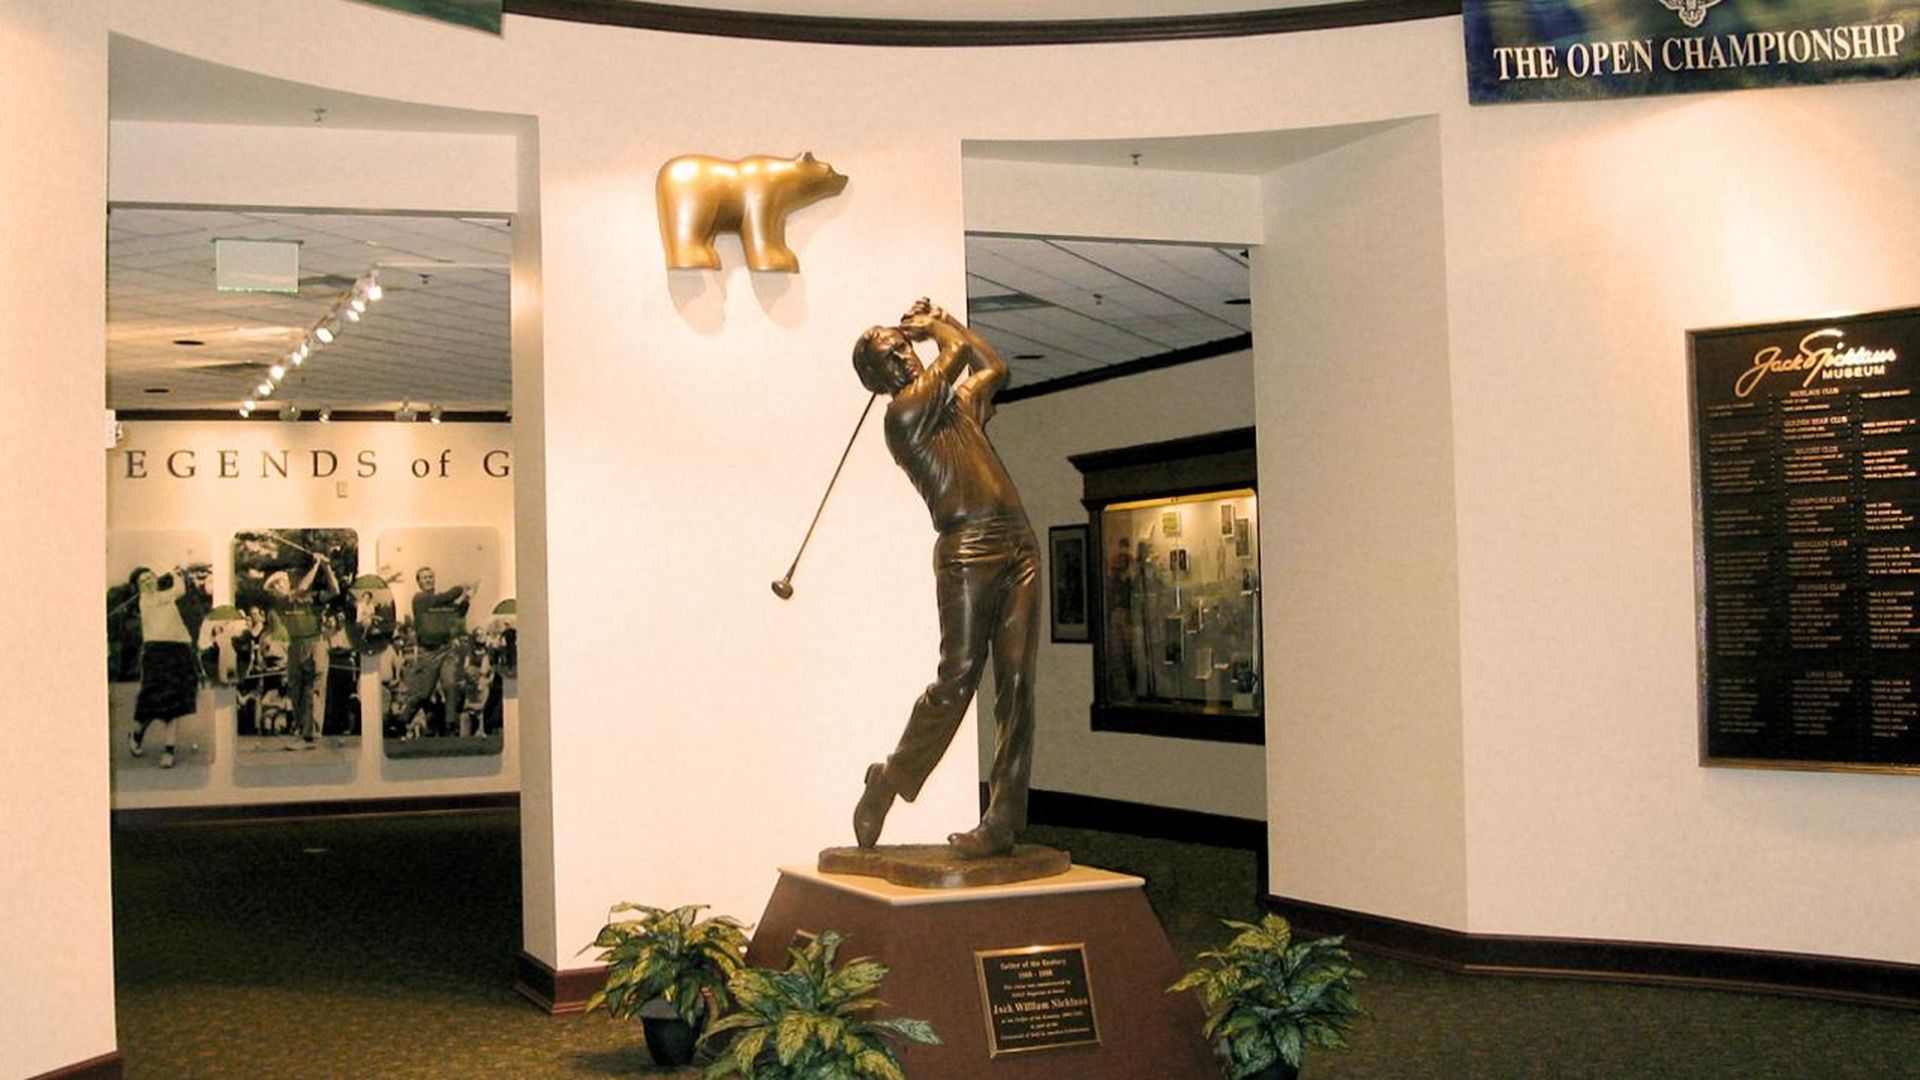 A statue of Jack Nicklaus in the foyer entrance of the Jack Nicklaus Museum